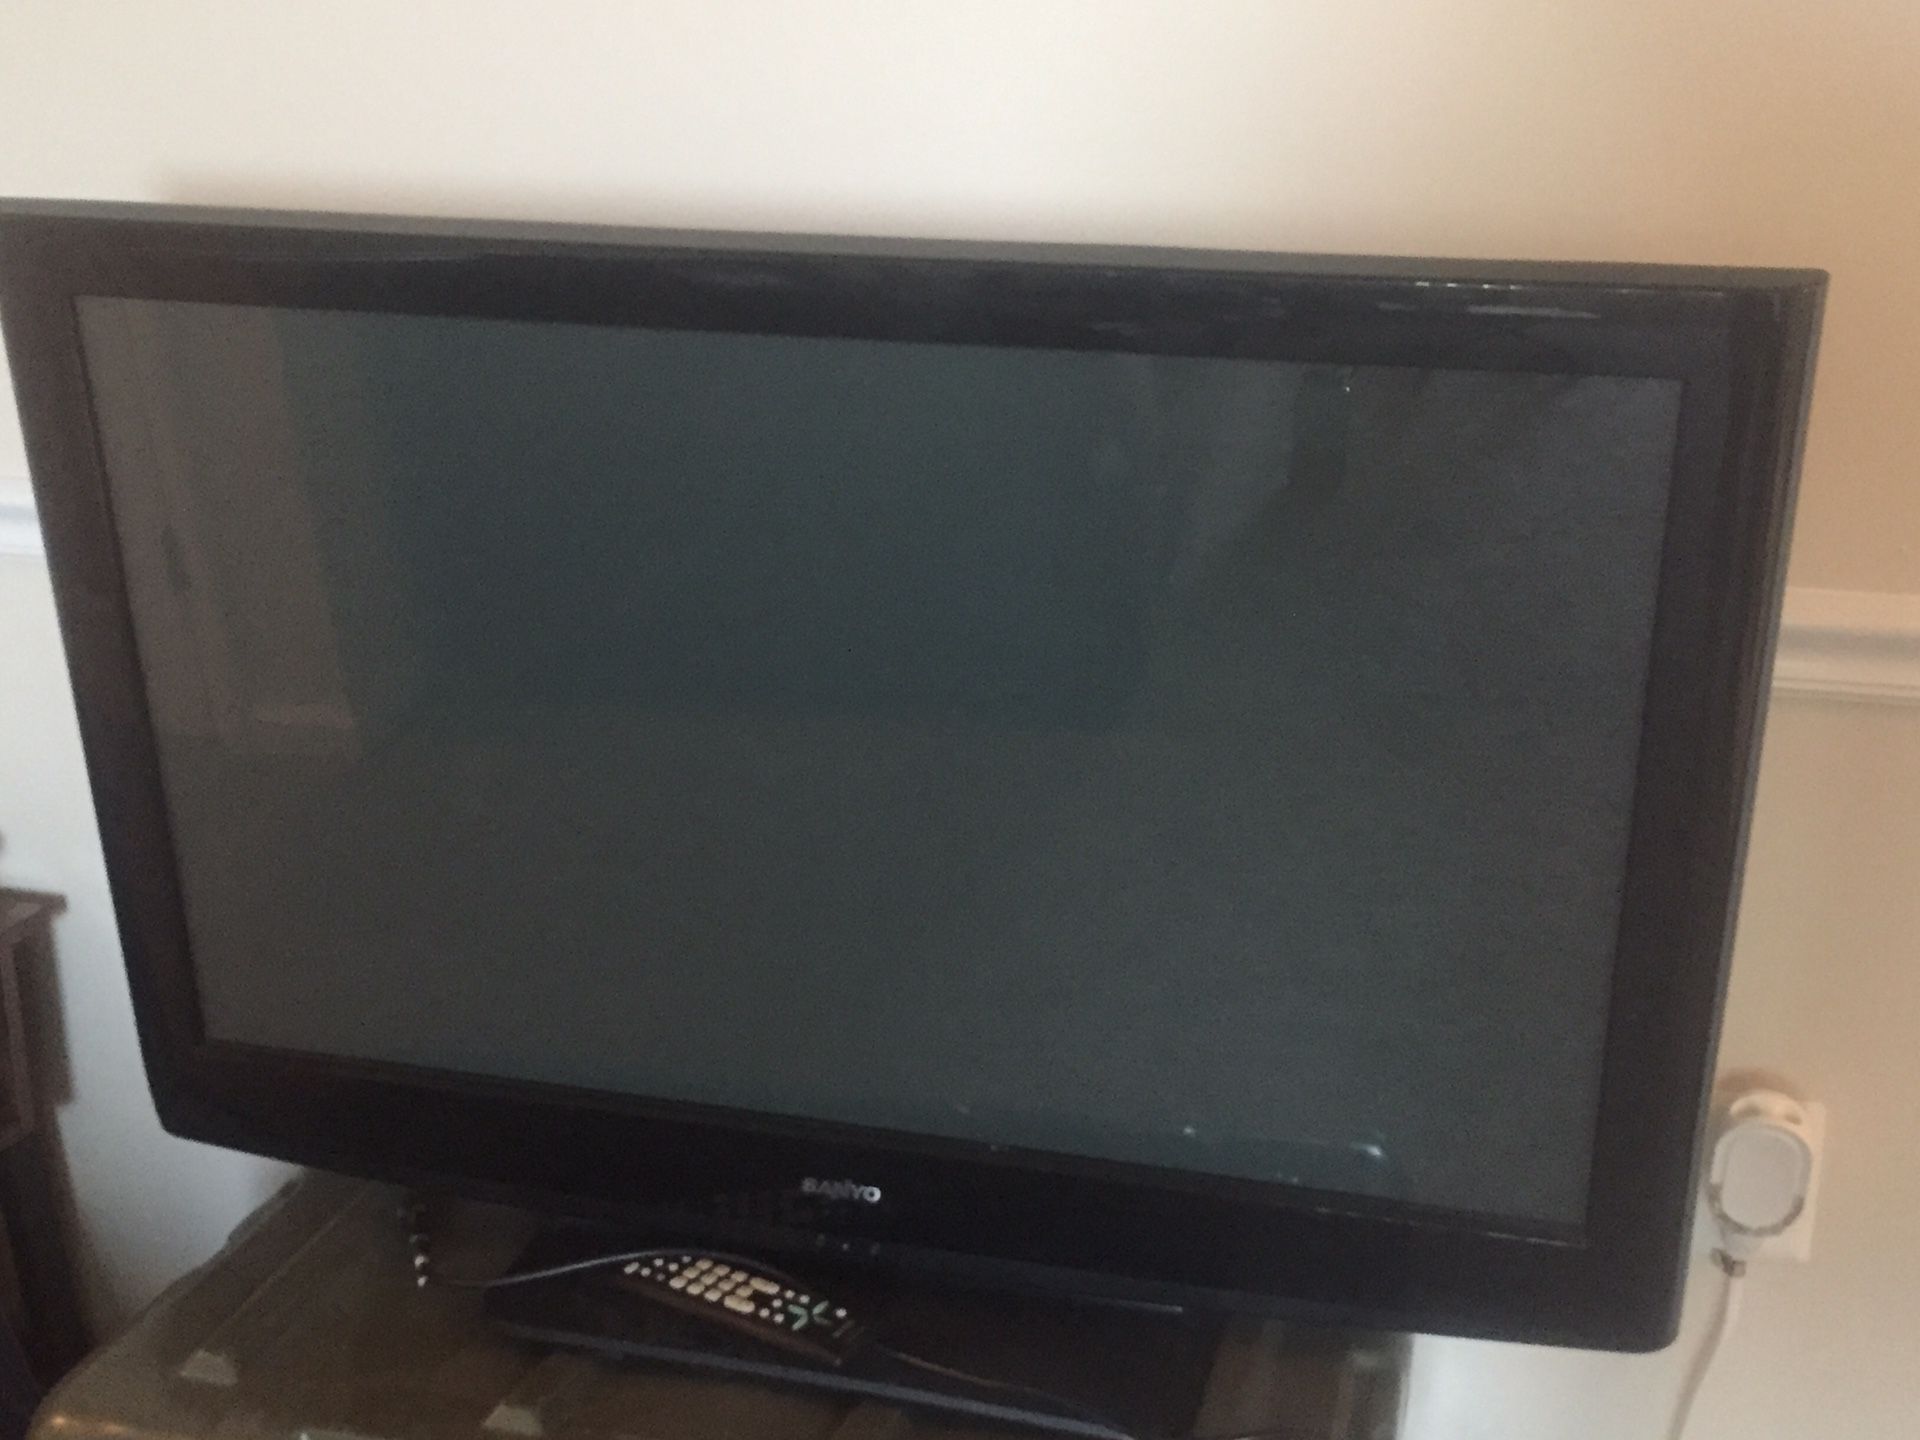 Sanyo 32” TV for sale. Has remote and power cable.